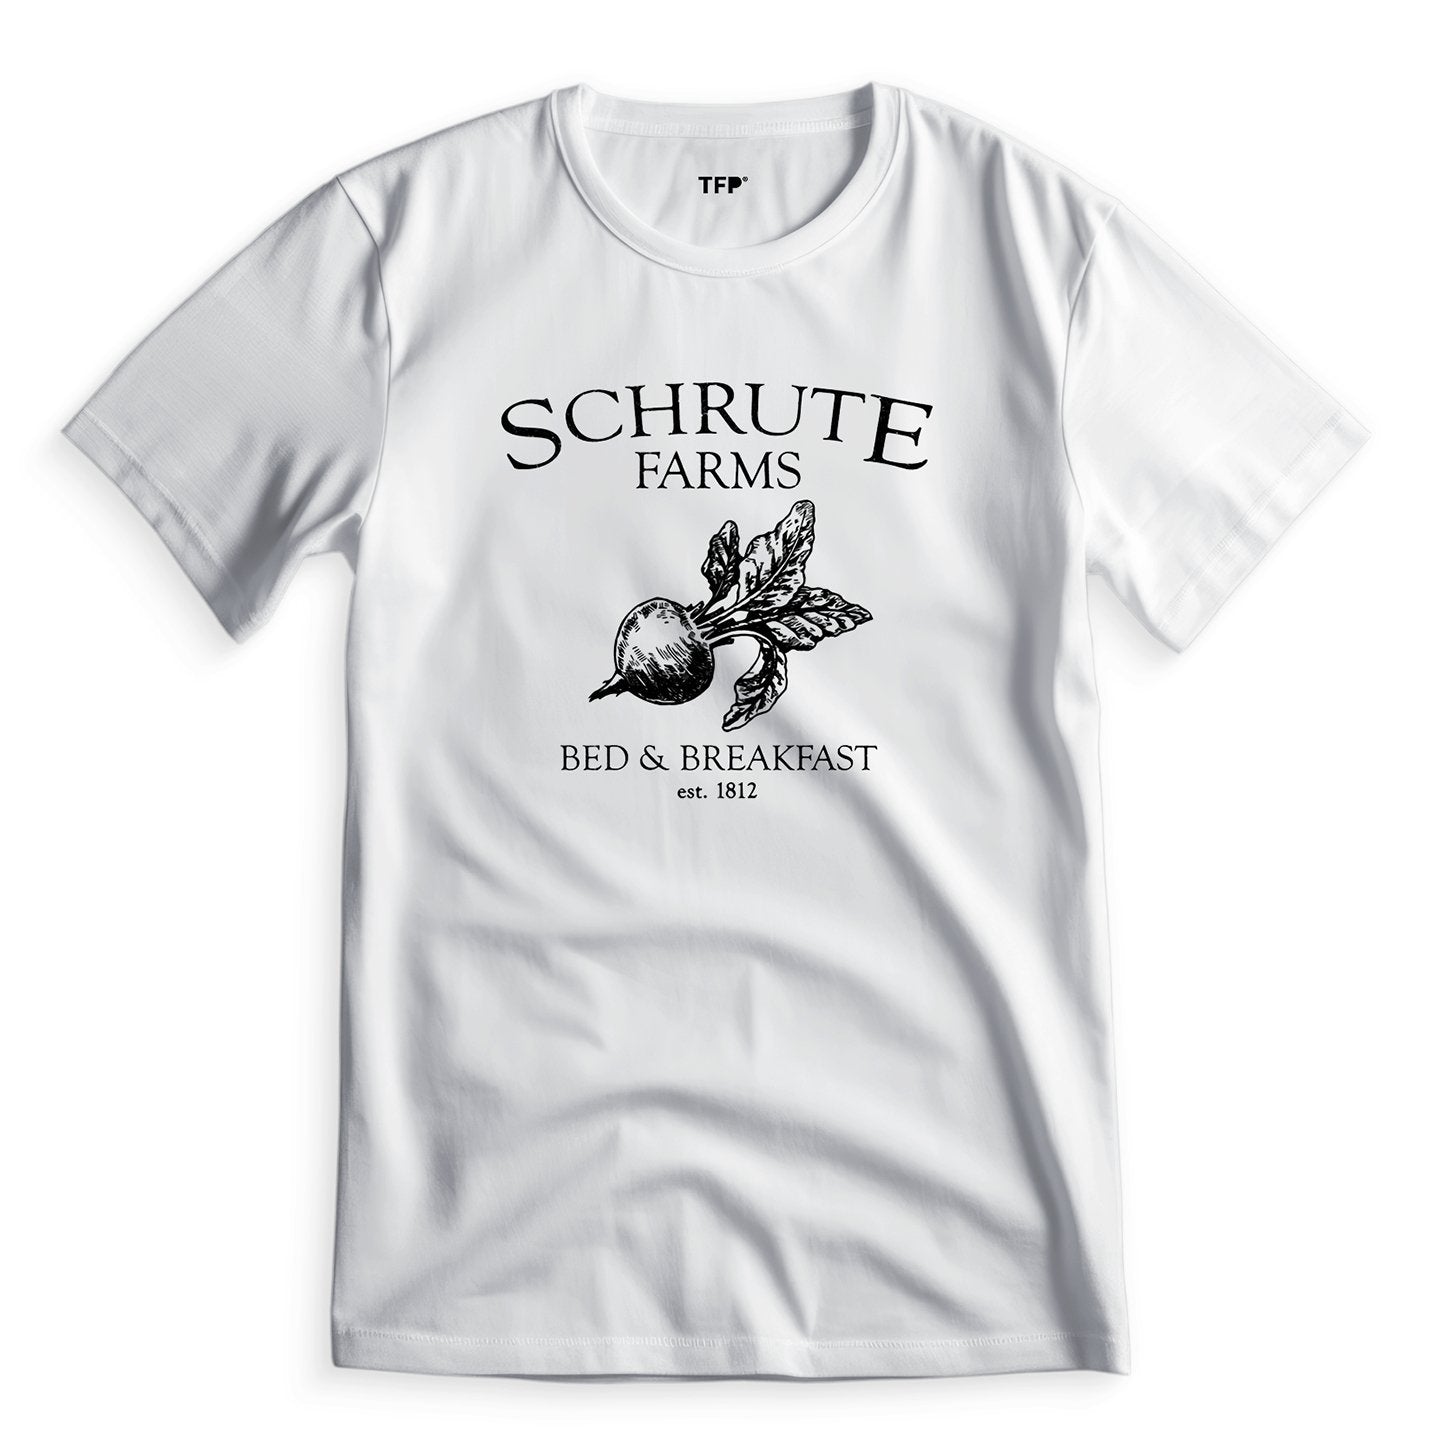 Schrute Farms The Office - T-Shirt